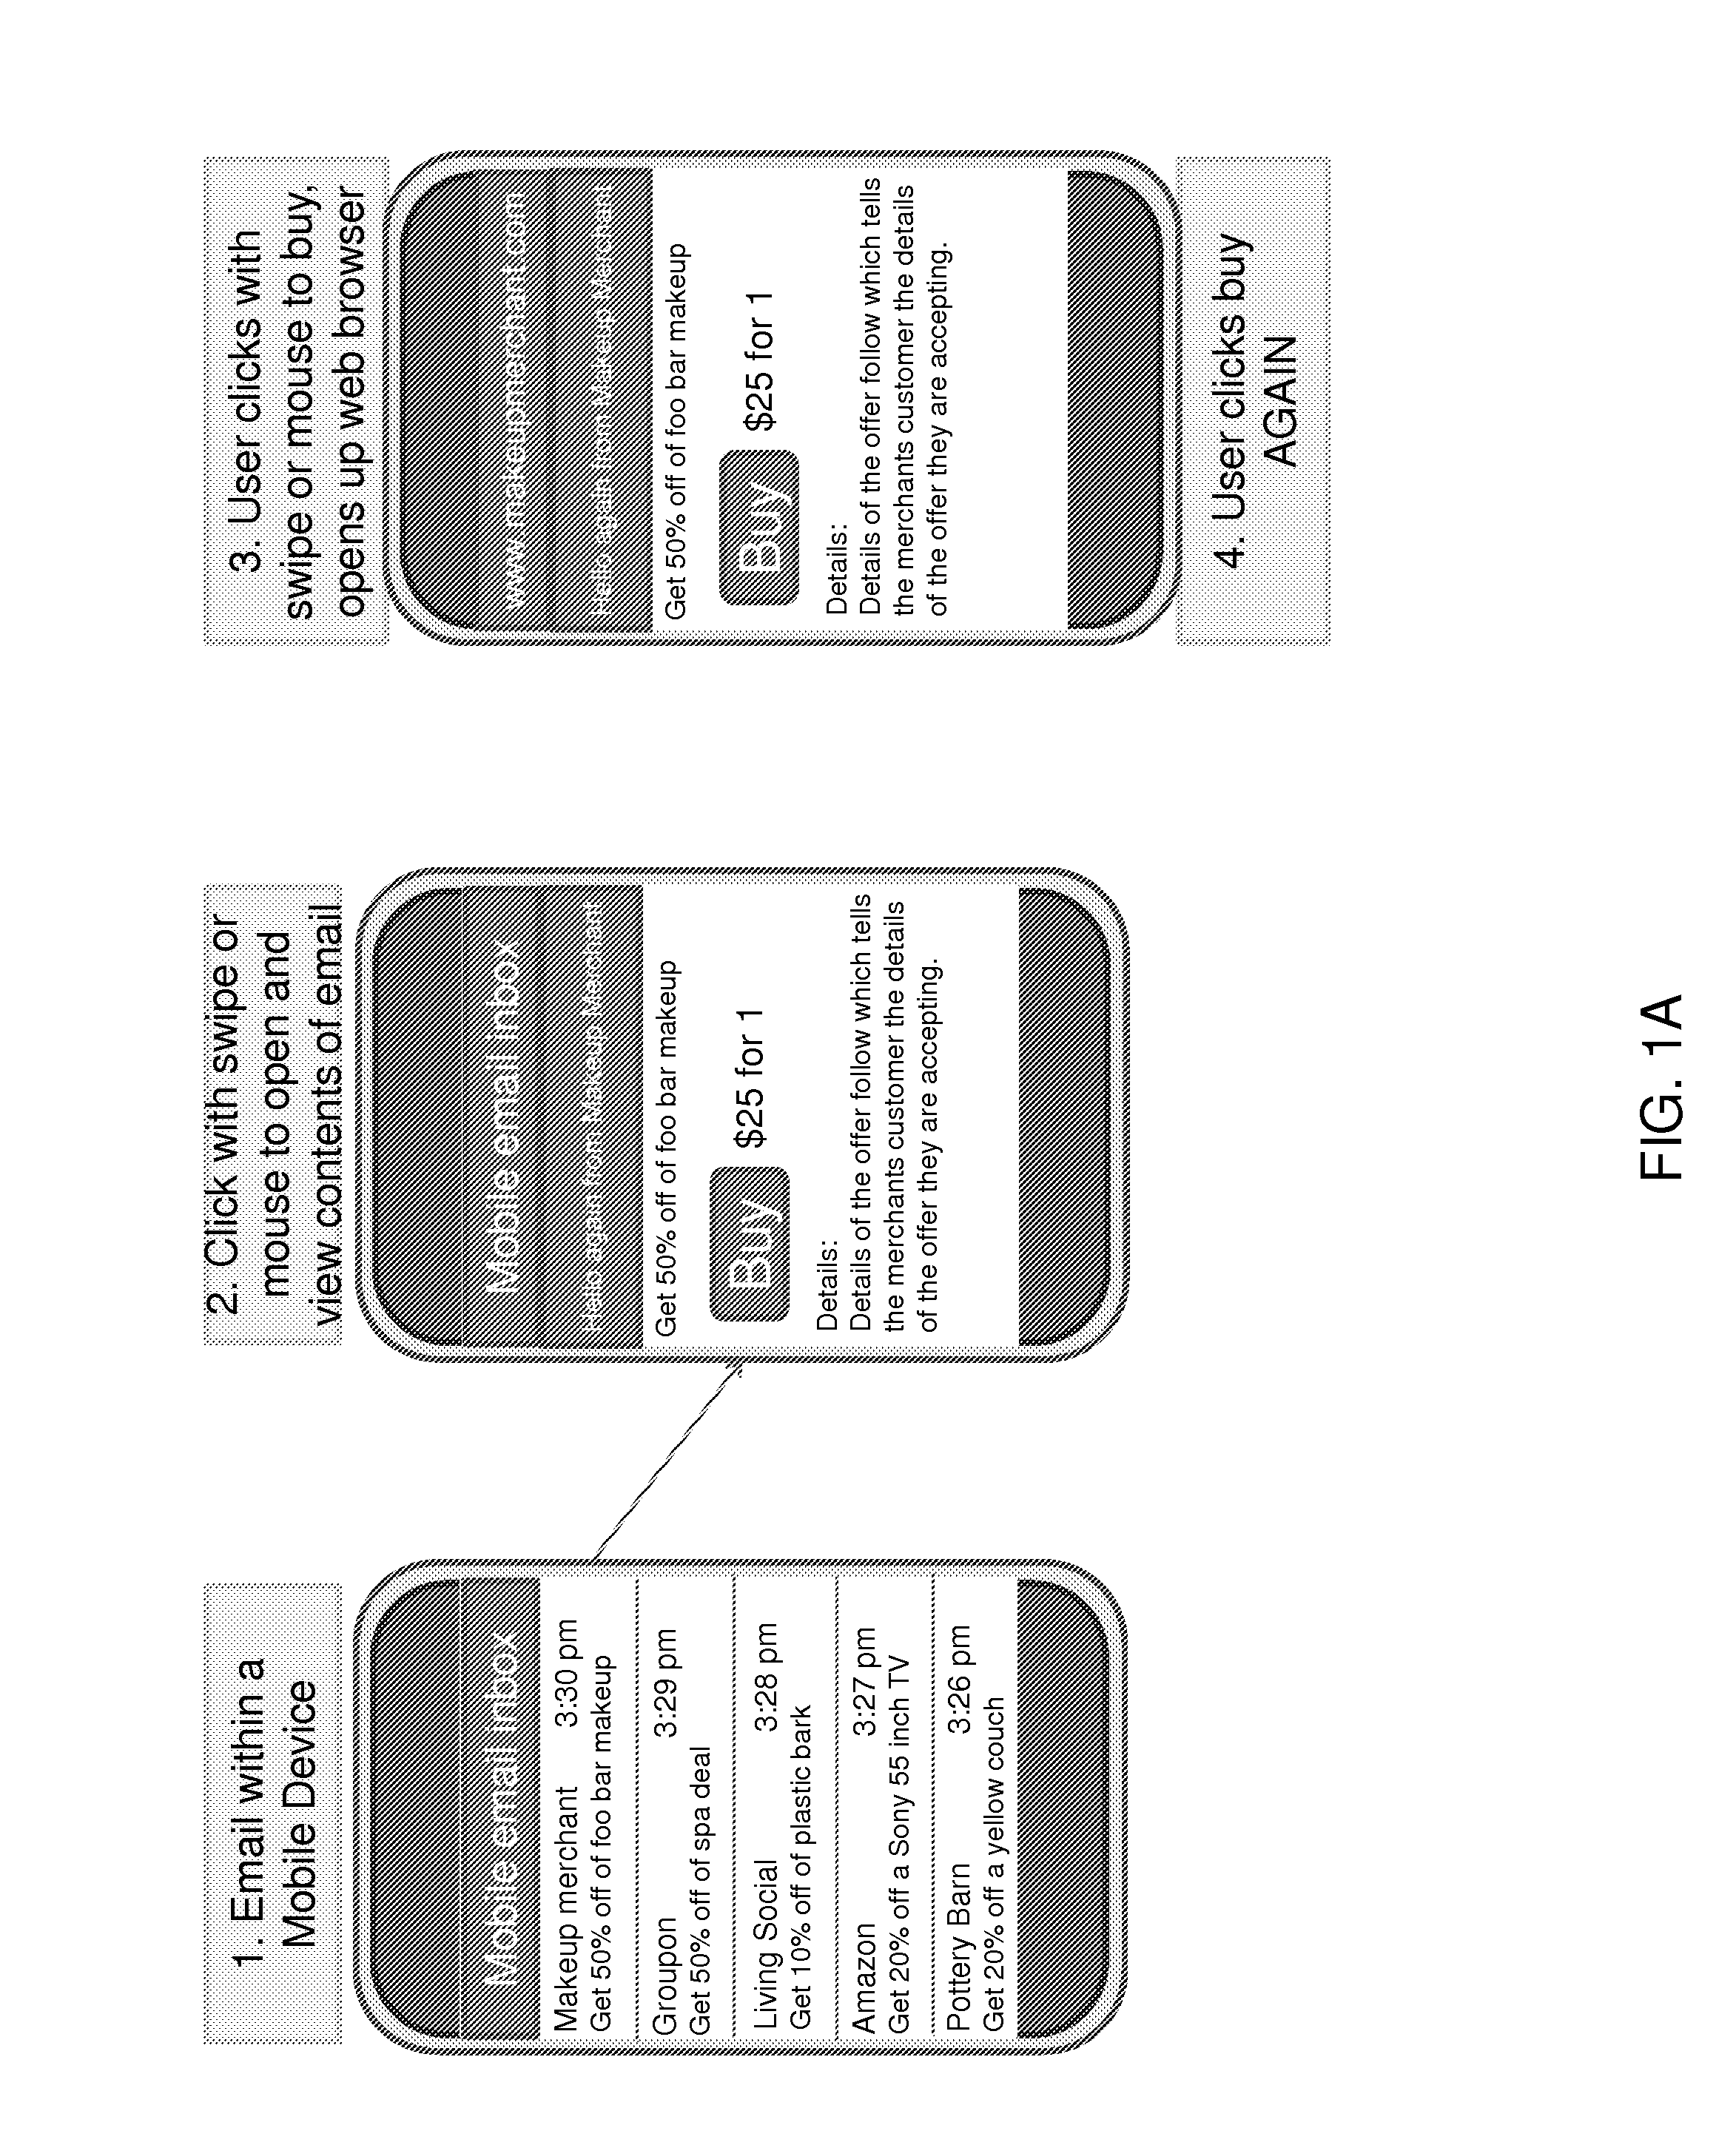 System, method, and computer program product for electronic purchasing without alpha numeric data entry